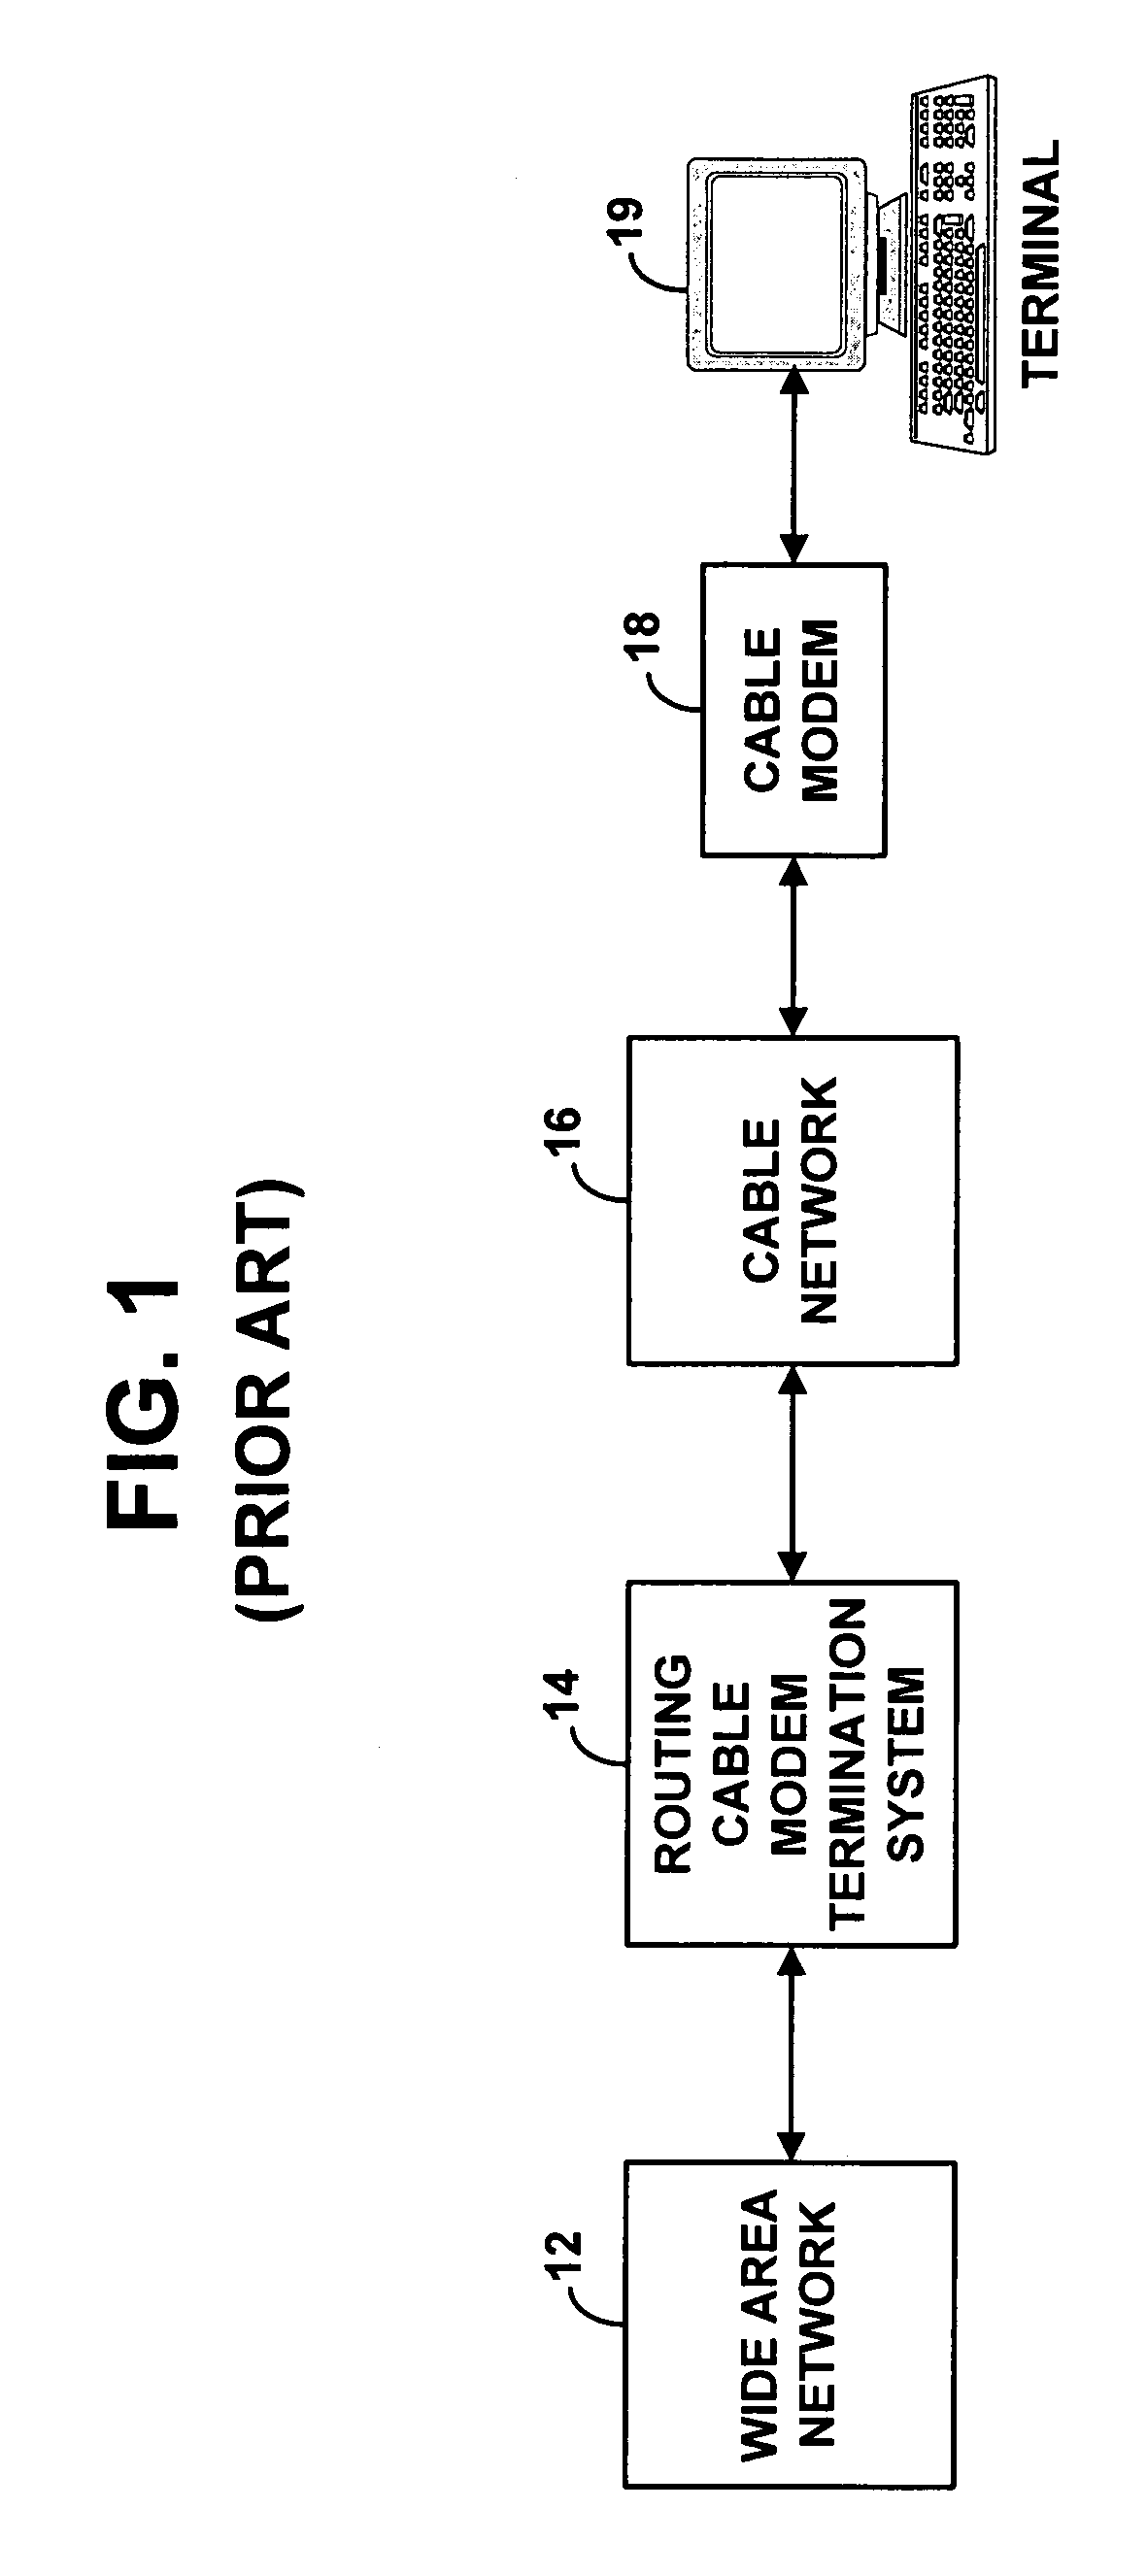 Method and apparatus for PPPoE bridging in a routing CMTS